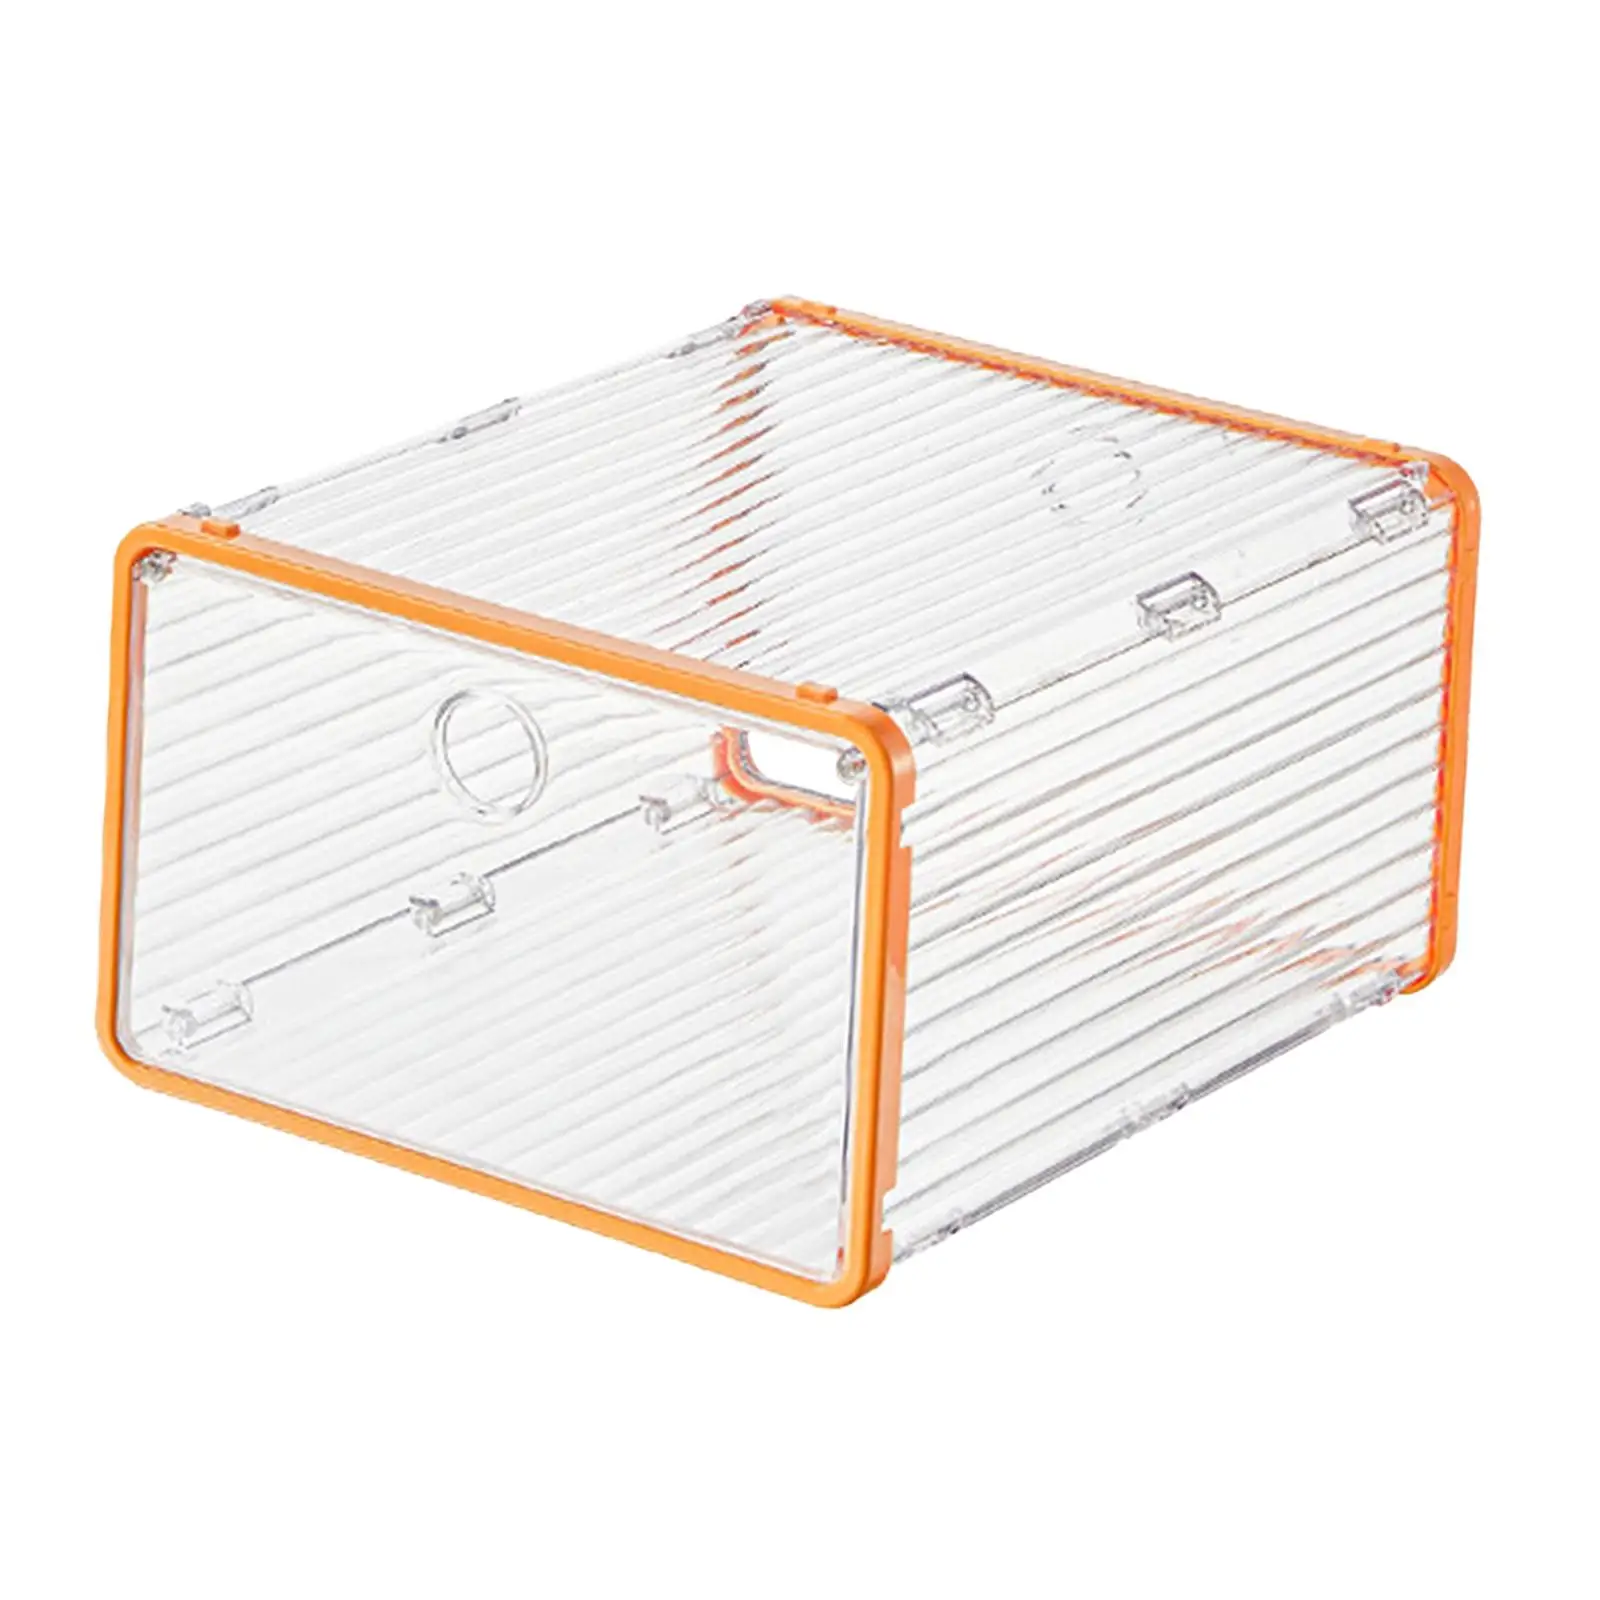 Large Shoe Storage Box Shoe Organizer Toys Bins Side Opening with Lid Display Case for Closet Dorm Apartment Bathroom Camper